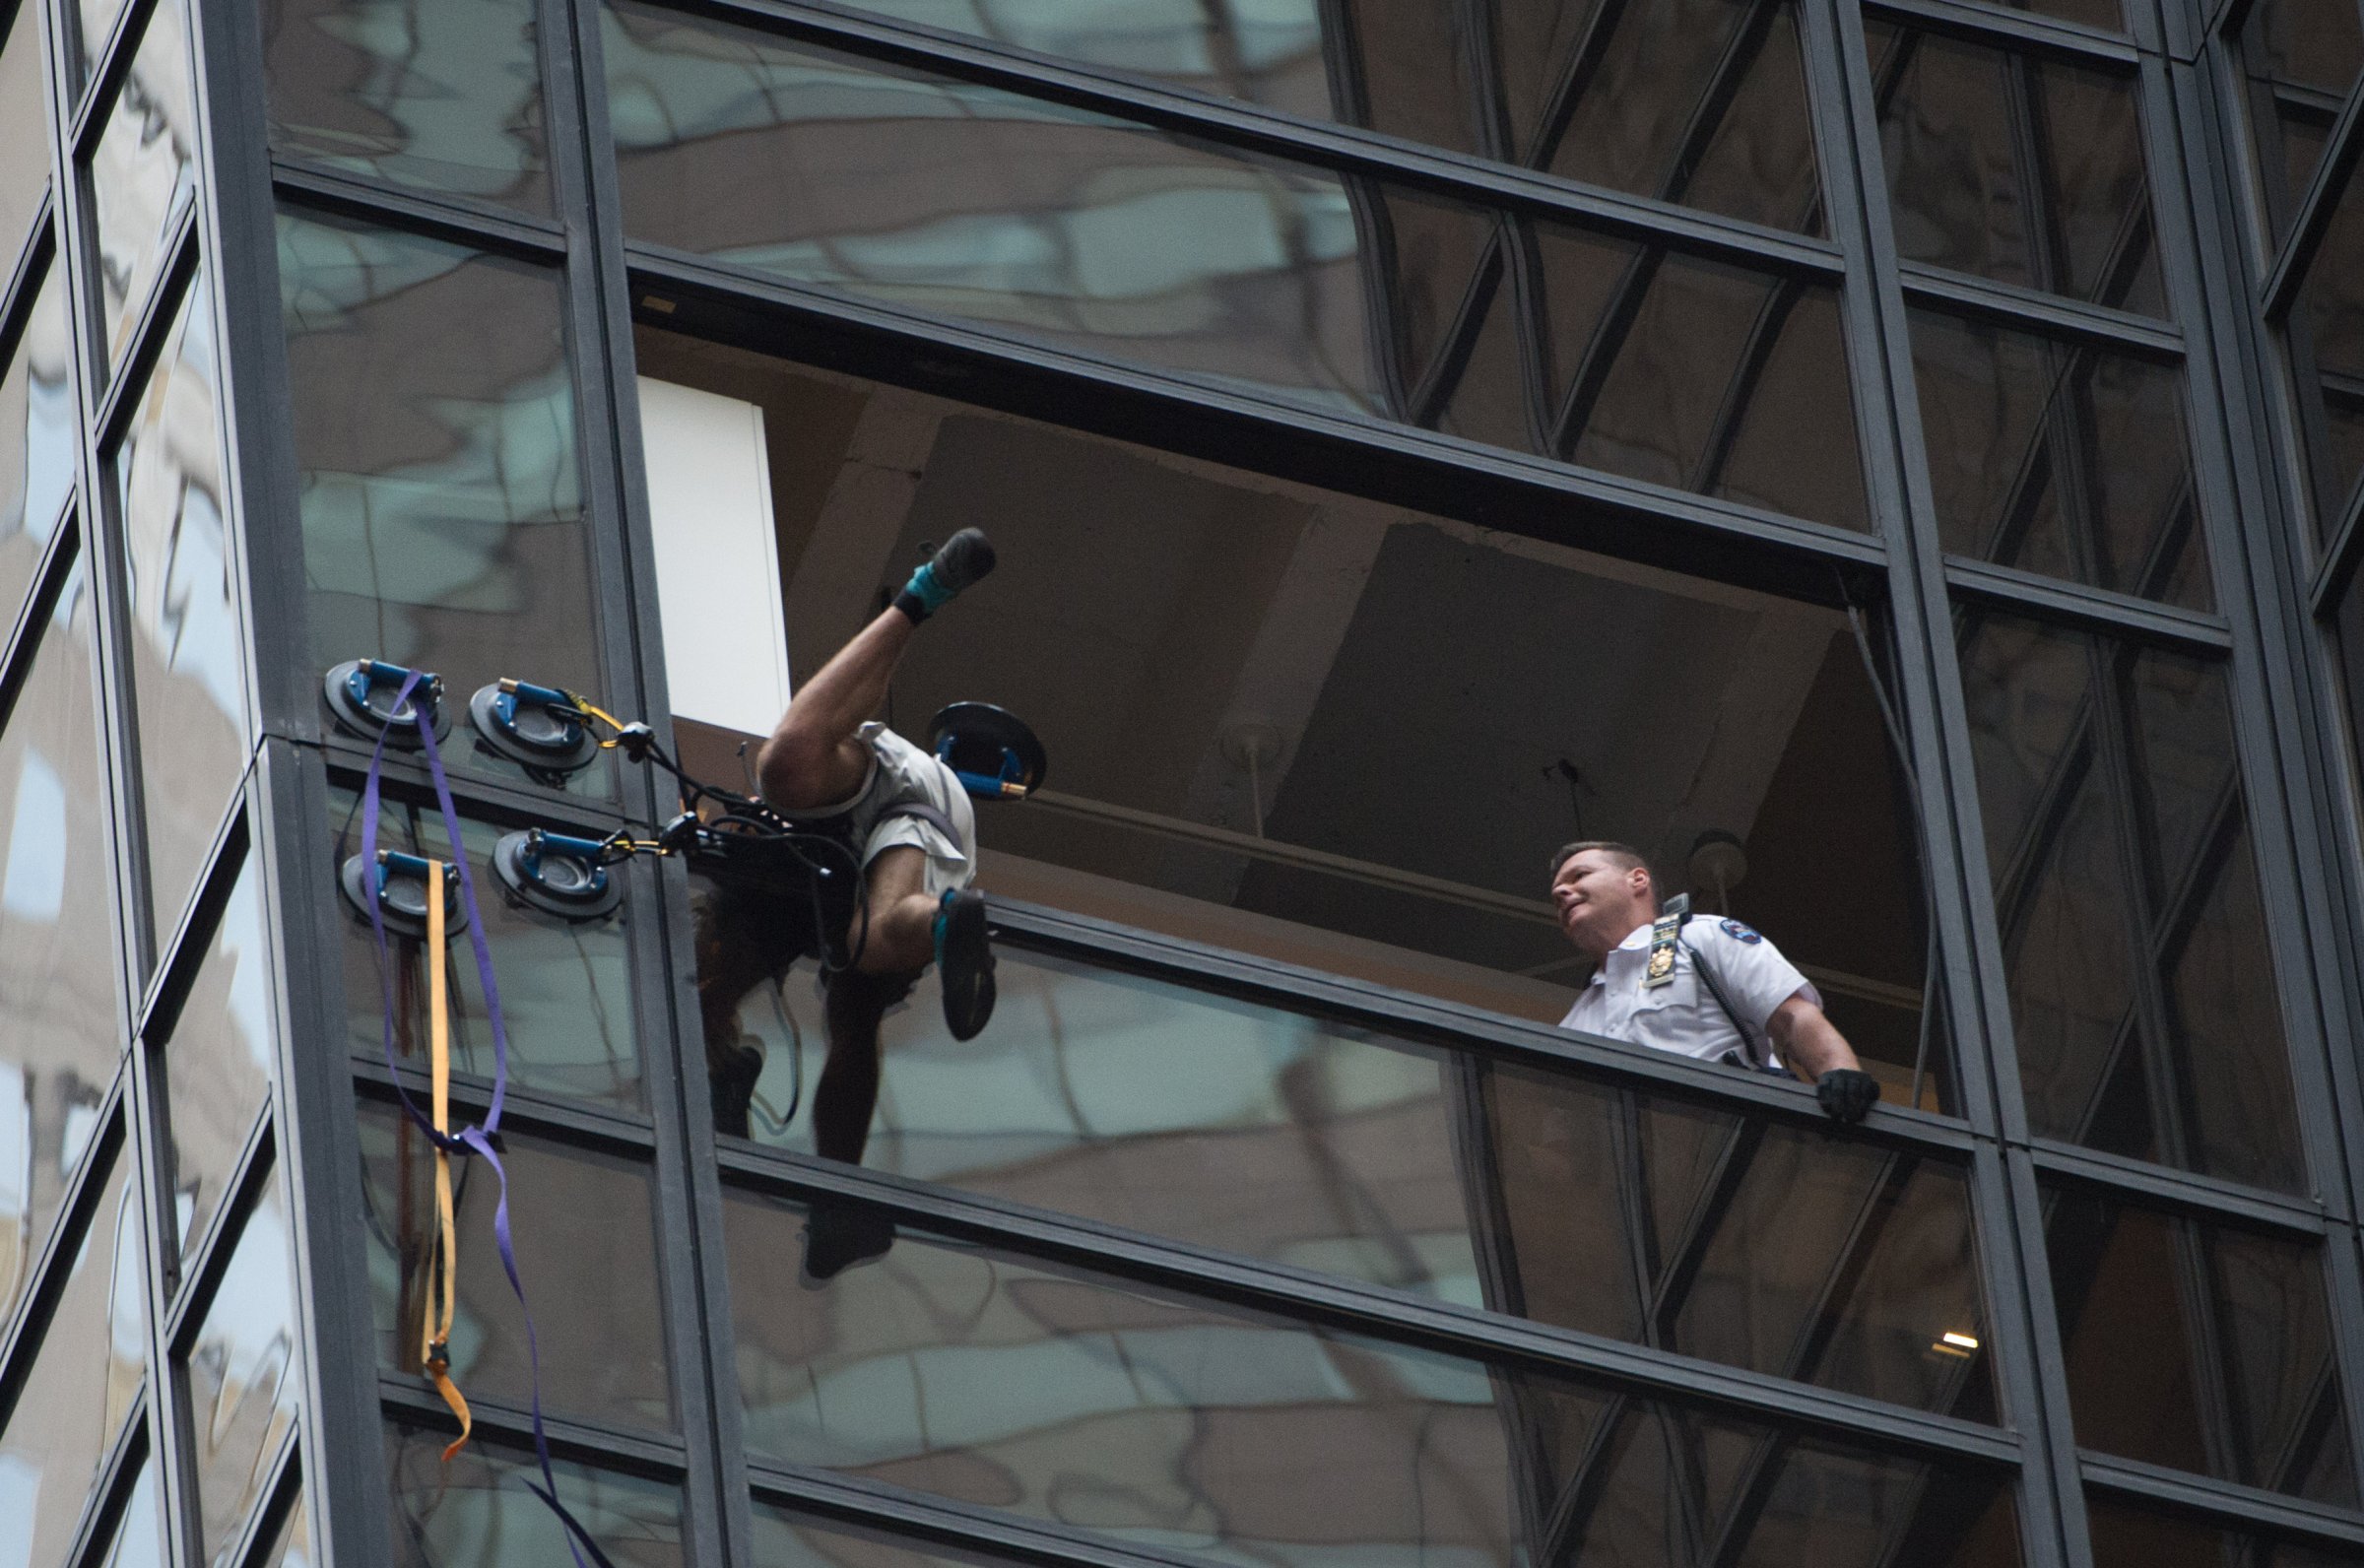 Police grab an unidentified man scaling Trump Tower using suction cups, August 10, 2016 in New York. Police on August 10, 2016 captured a climber scaling Trump Tower, dragging him to safety through an open window on the 21st floor of the New York headquarters of the Republican nominee for US president. Live television footage showed uniformed officers reaching out and grabbing the young man -- dressed in grey shorts, an olive T-shirt and white cap -- around three hours after he started his ascent using five suction cups. "The climber has been taken into custody," a police spokesman tweeted.